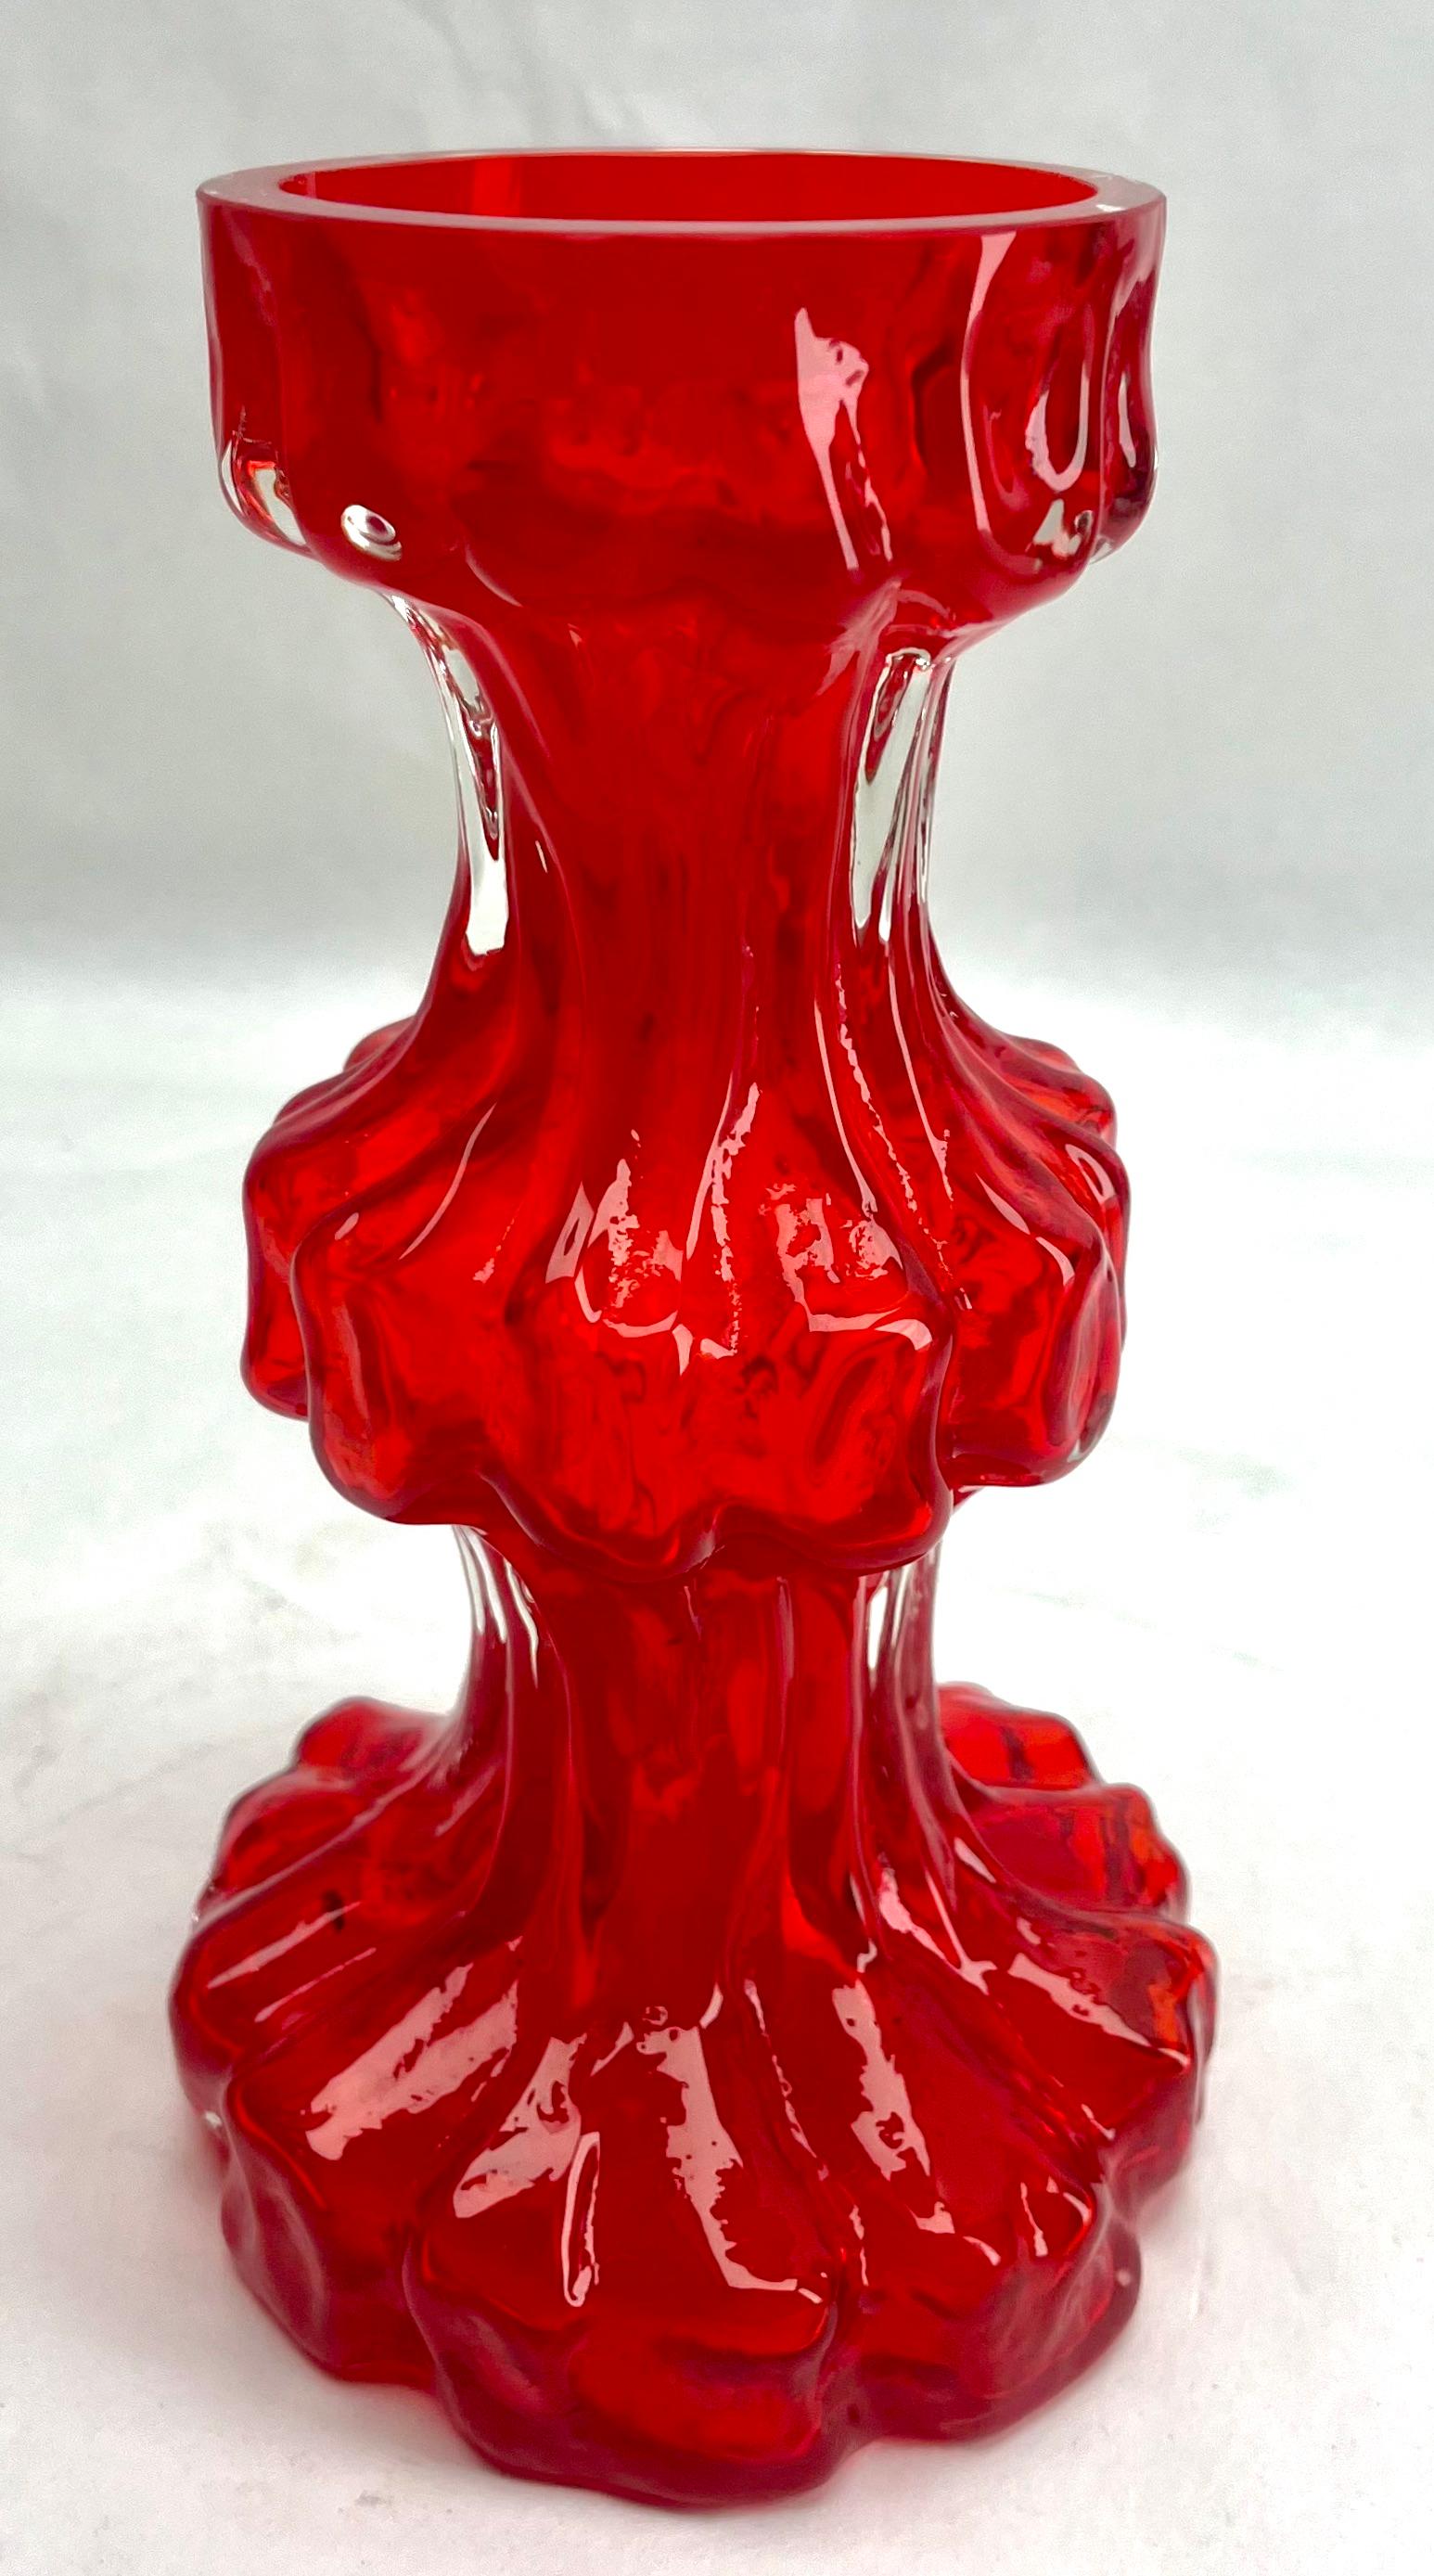 Ingrid Glas ‘Germany’ Bark Vase in Red, 1970s In Good Condition For Sale In Verviers, BE